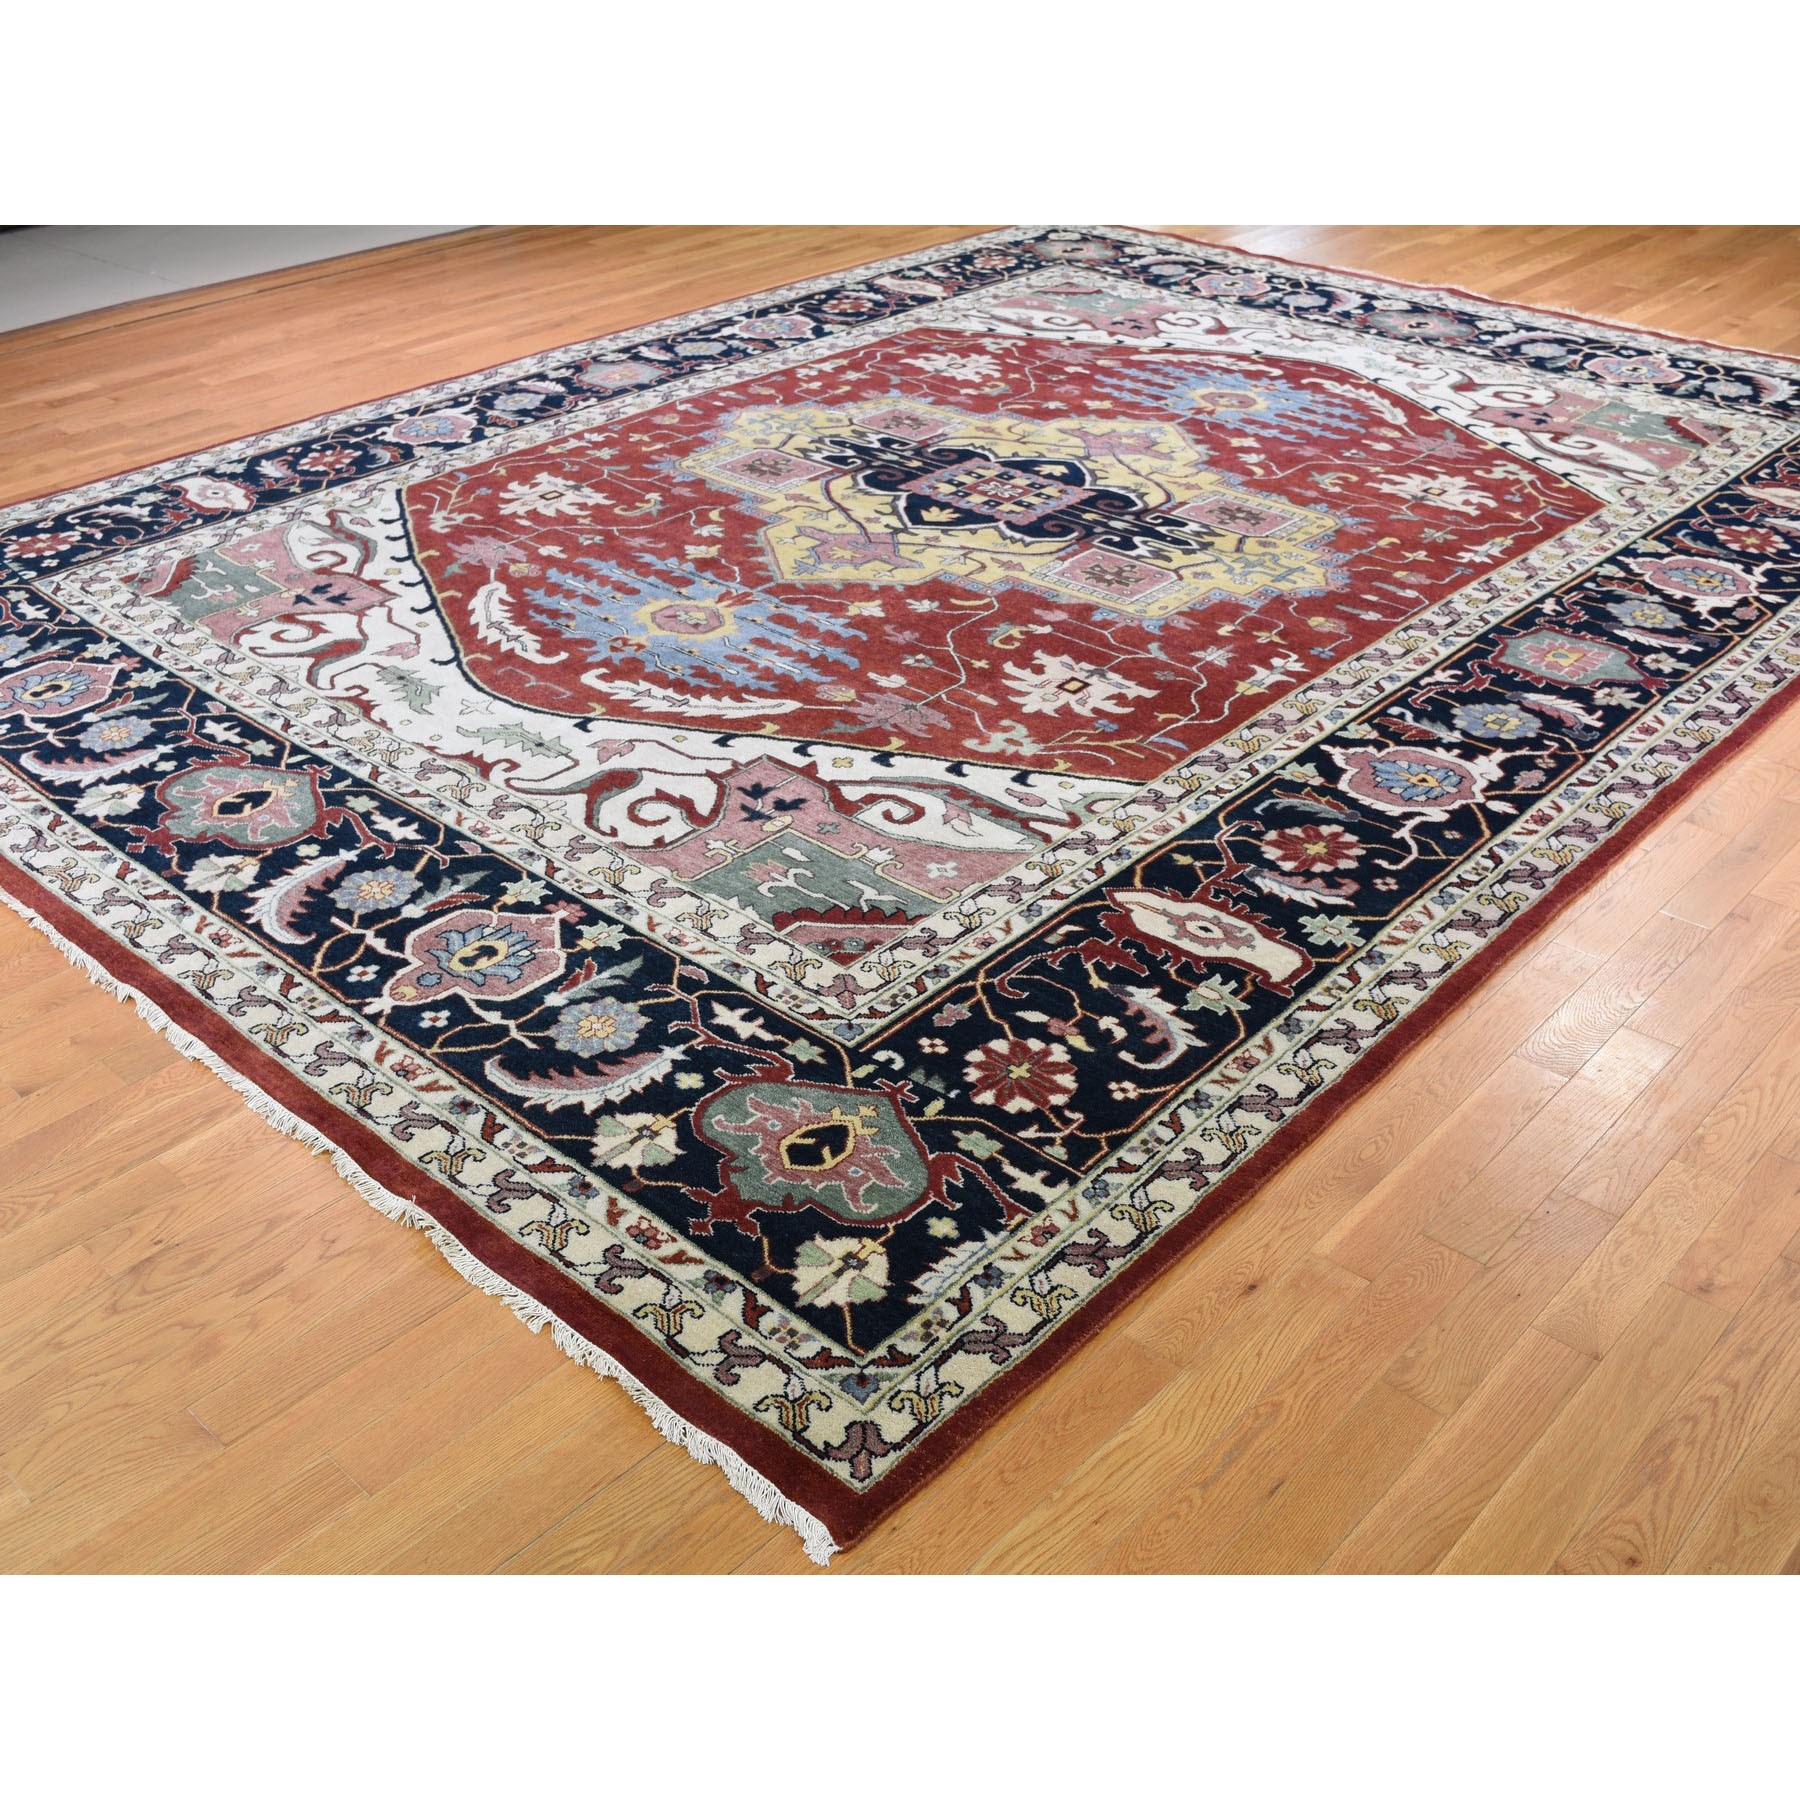 11-7 x15- Oversized Red Heriz Revival Pure Wool Hand Knotted Oriental Rug 